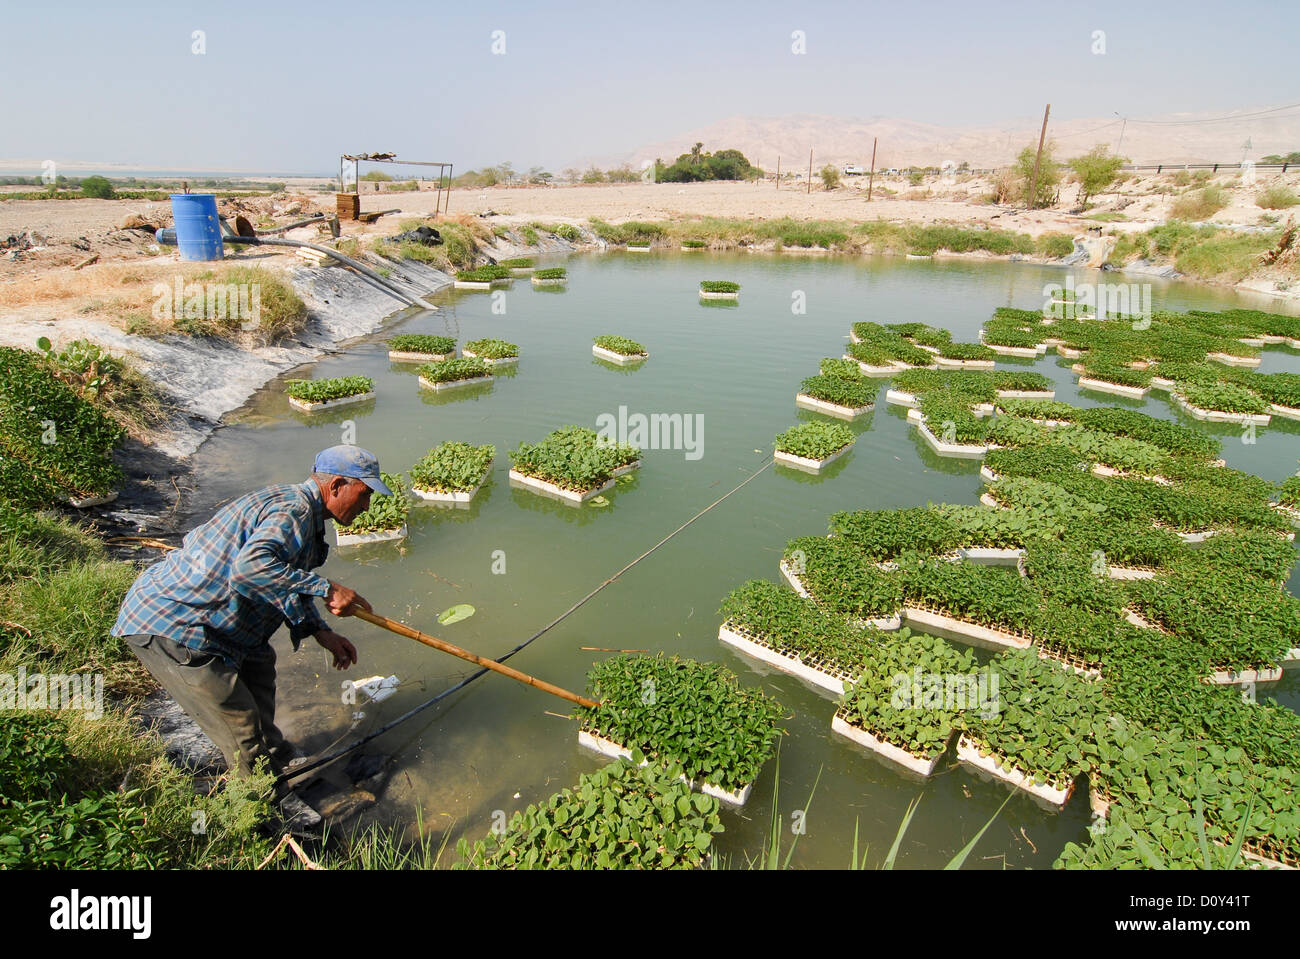 JORDAN Water Shortage And Agriculture In The Jordan Valley Stock Photo 